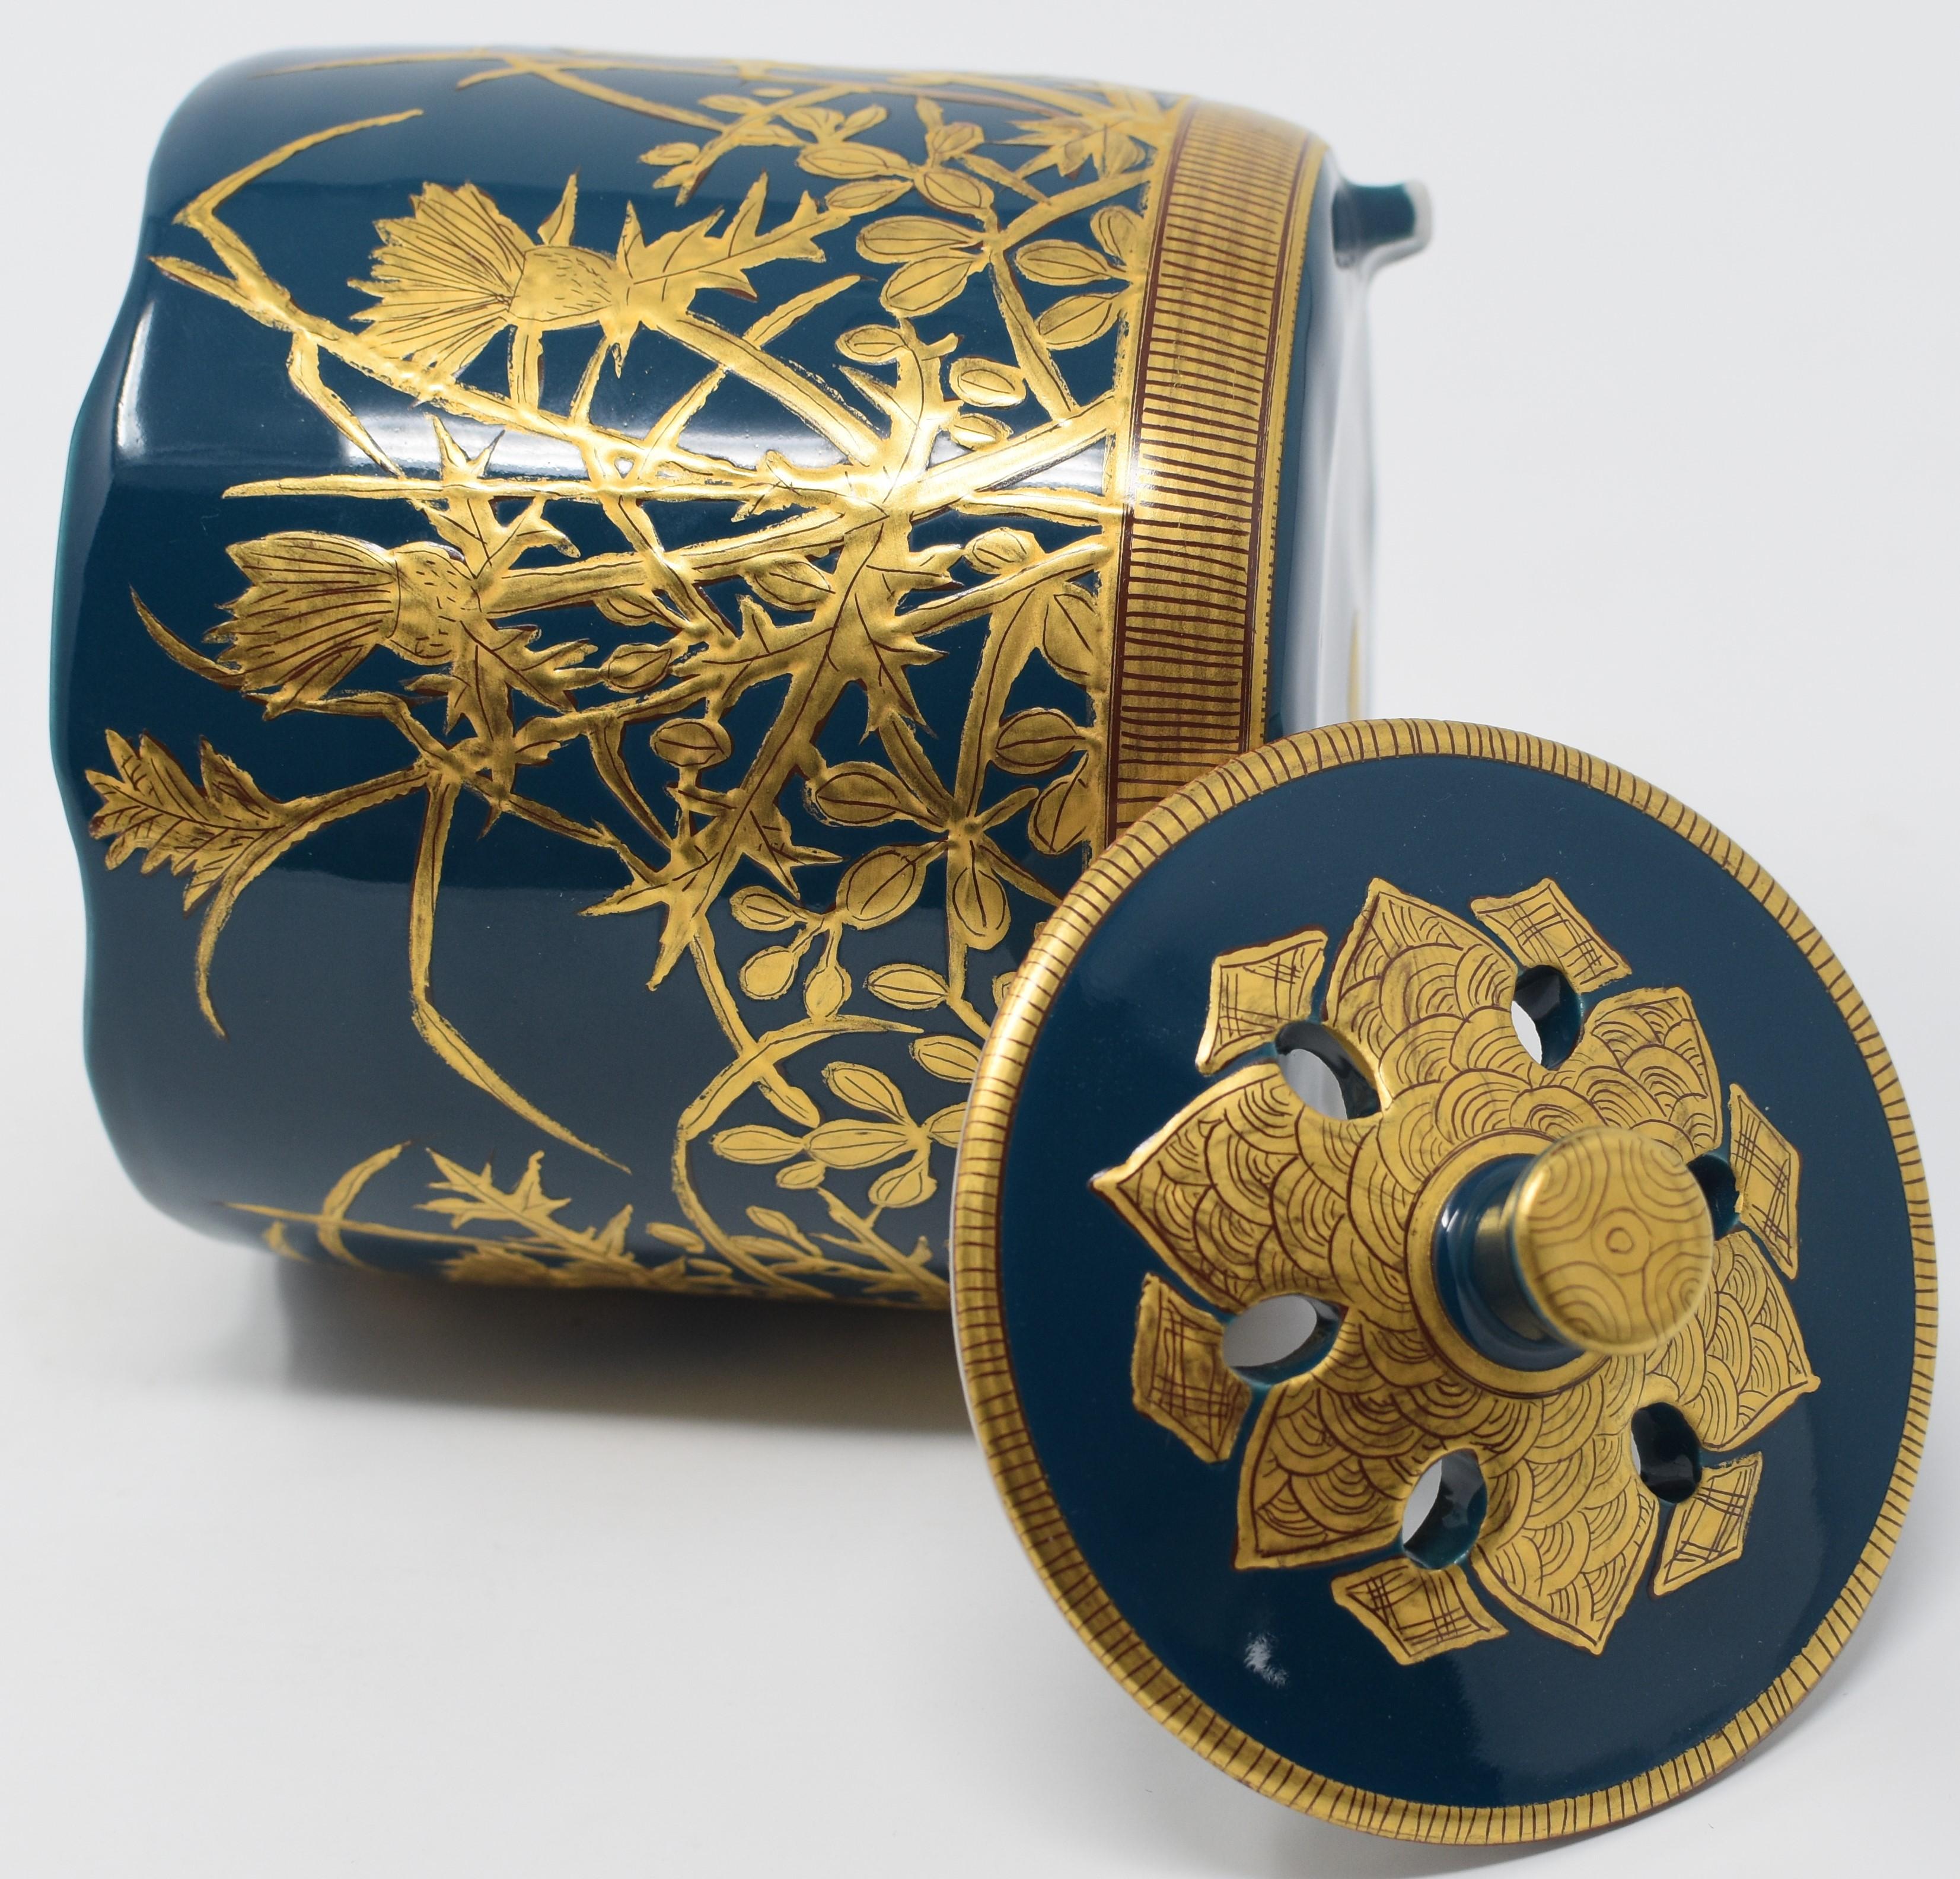 Japanese contemporary porcelain incense burner/lidded jar, intricately and generously hand-painted with high purity gold on a beautifully shaped body in stunning signature deep blue, a signed masterpiece by widely acclaimed award-winning master